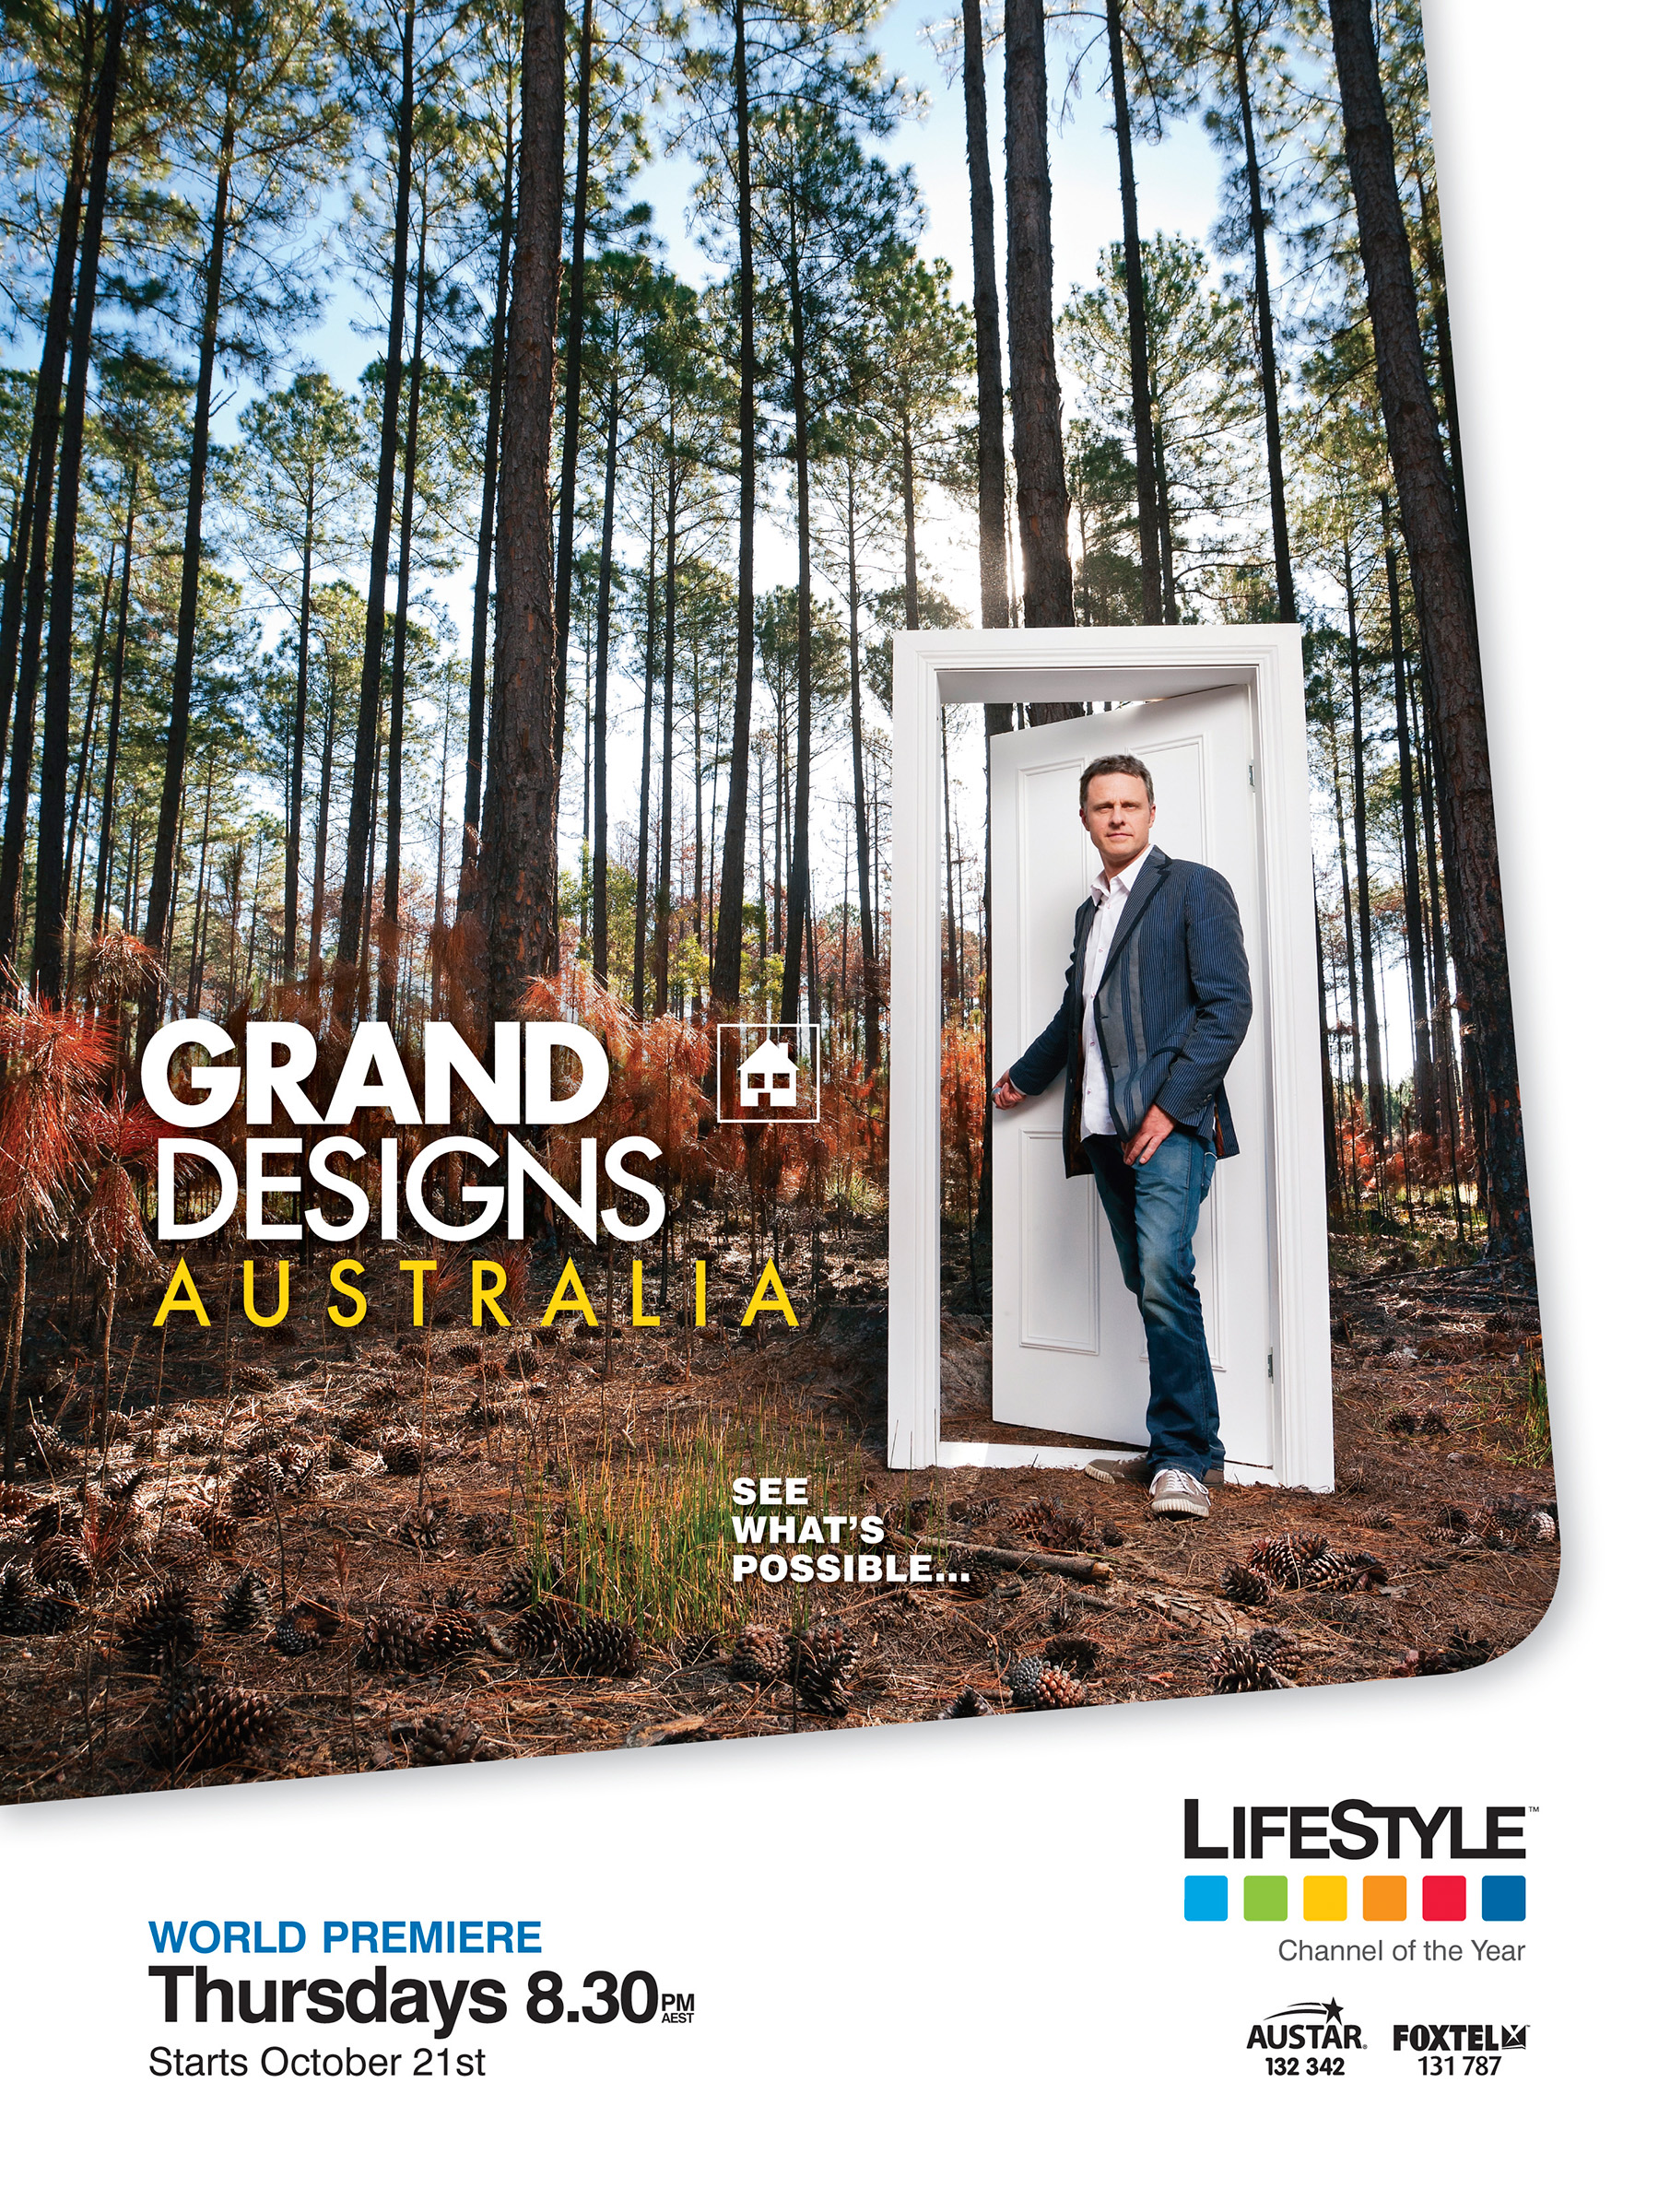 Advertising TV Series commercial photography Grand Designs Australia Peter Madison opening white door standing in the forest